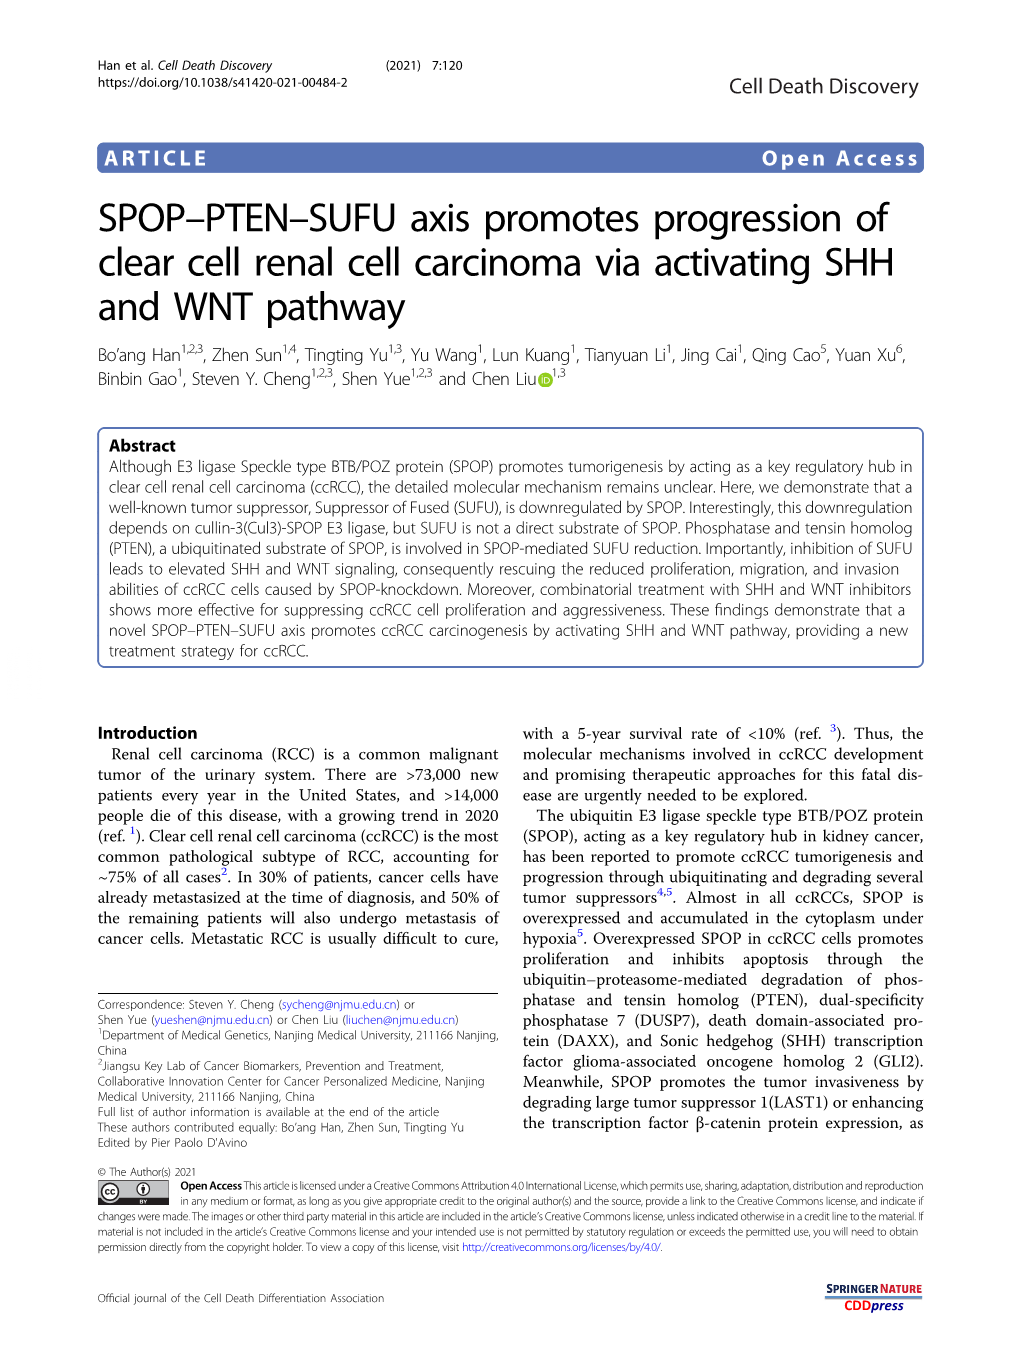 SPOP–PTEN–SUFU Axis Promotes Progression of Clear Cell Renal Cell